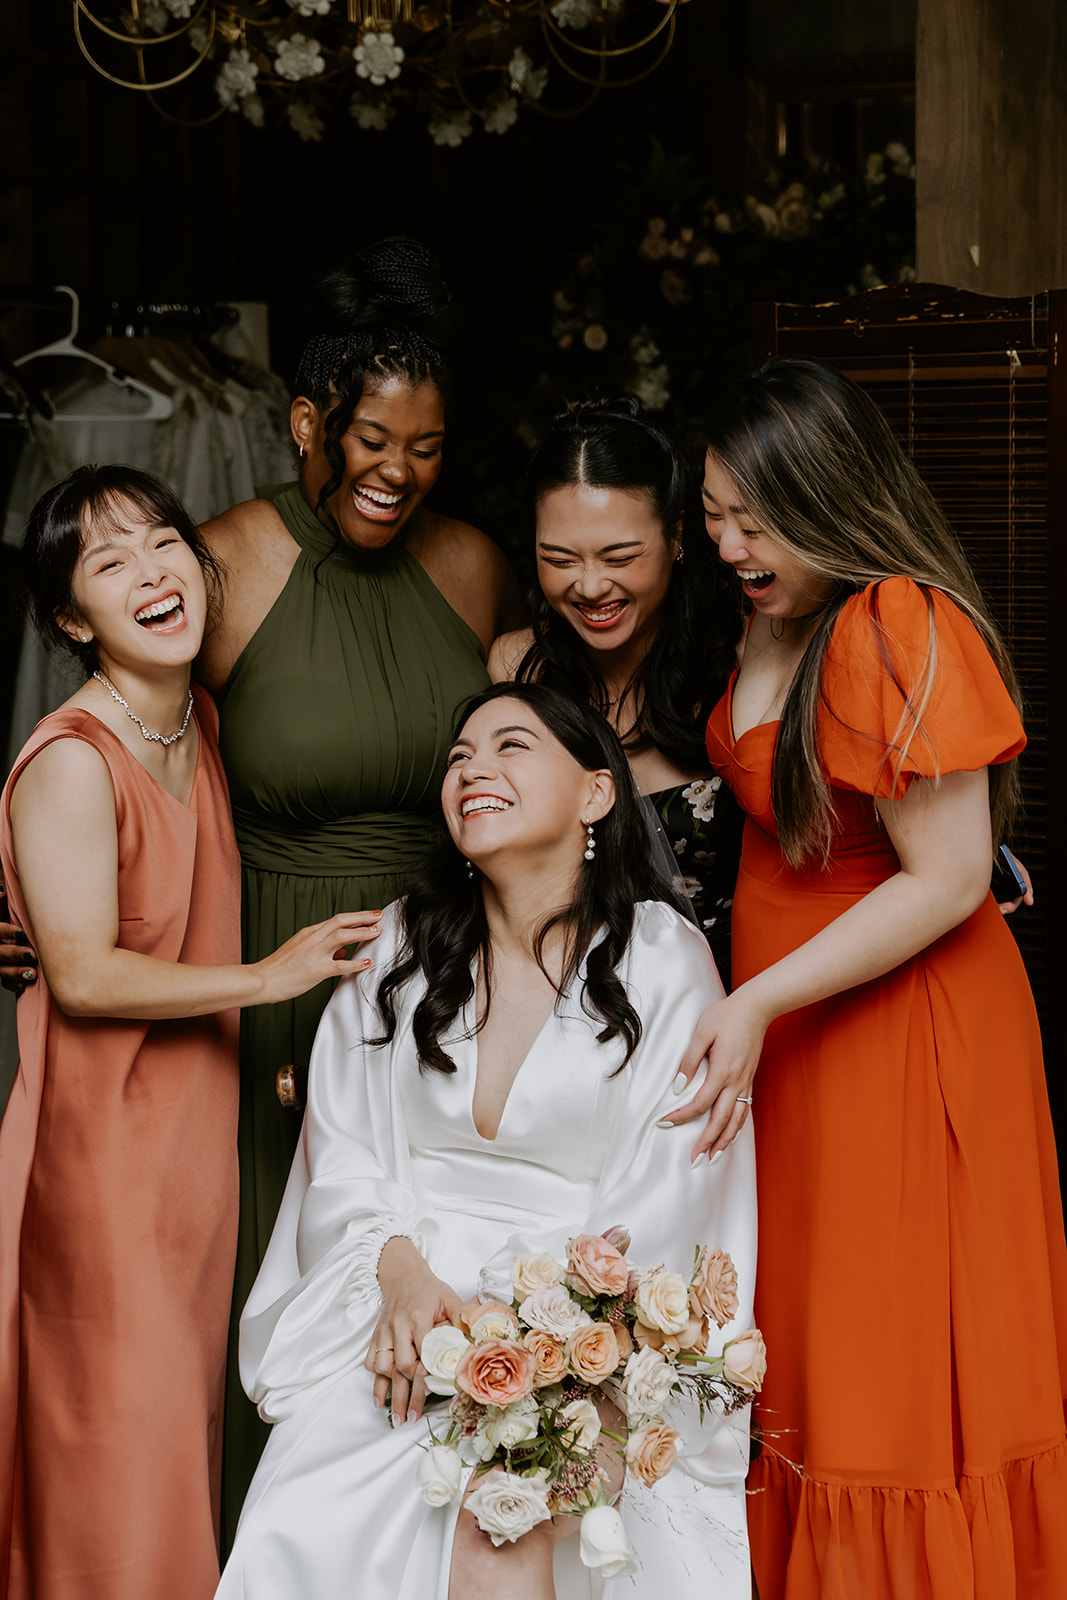 A bride in a white dress sits laughing with four bridesmaids in colorful dresses, holding a bouquet, in a rustic setting